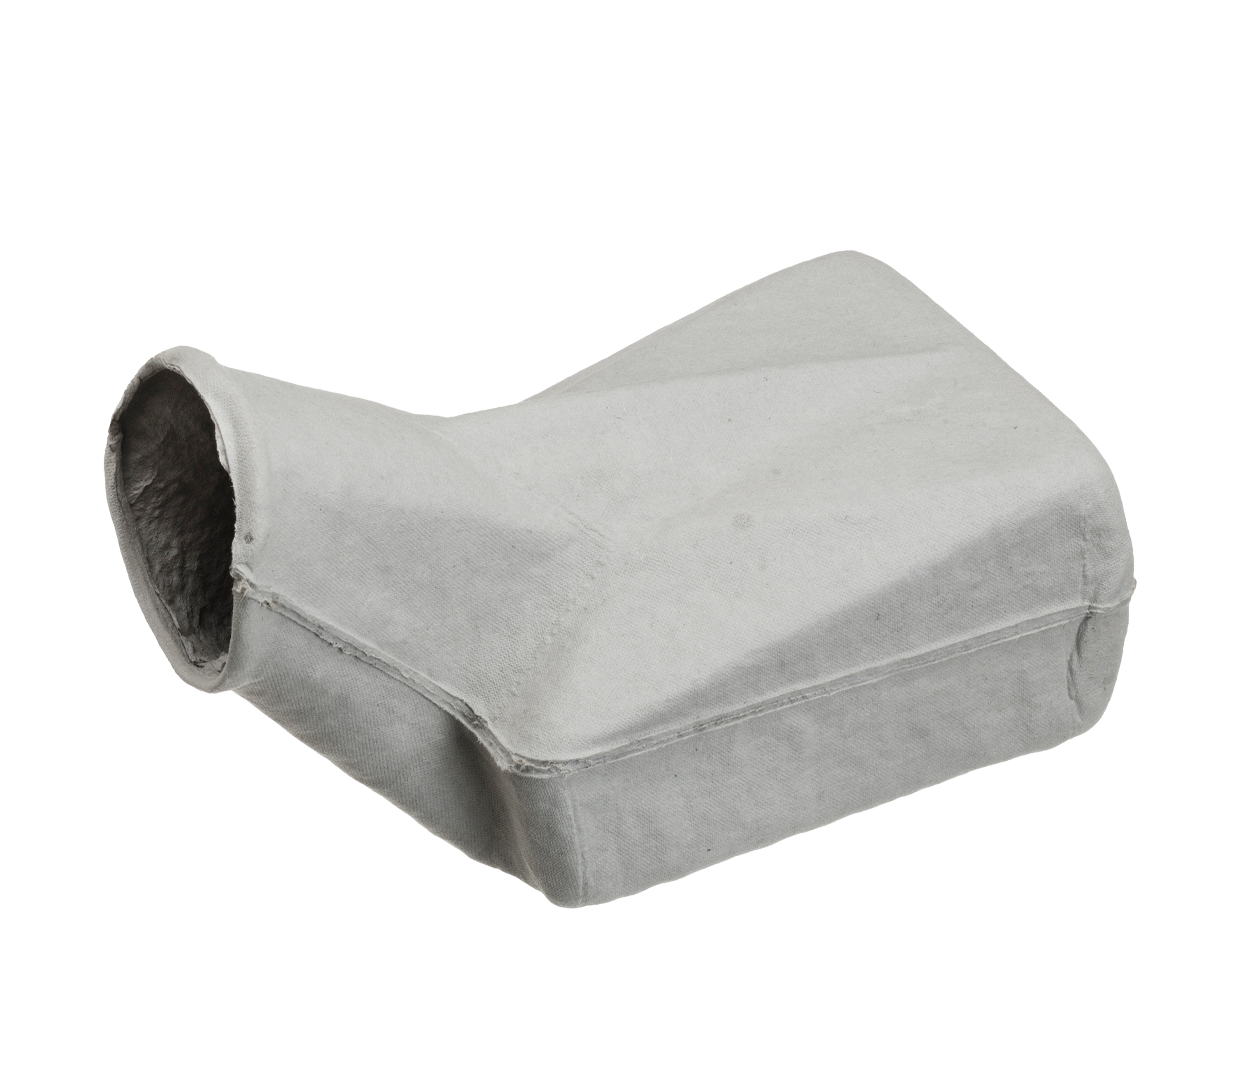 These single-use medical grade fiber male urinal bottles are constructed with a biodegradable pulp fiber made from 100% recycled newsprint and ideal for handling 900ml of fluid.